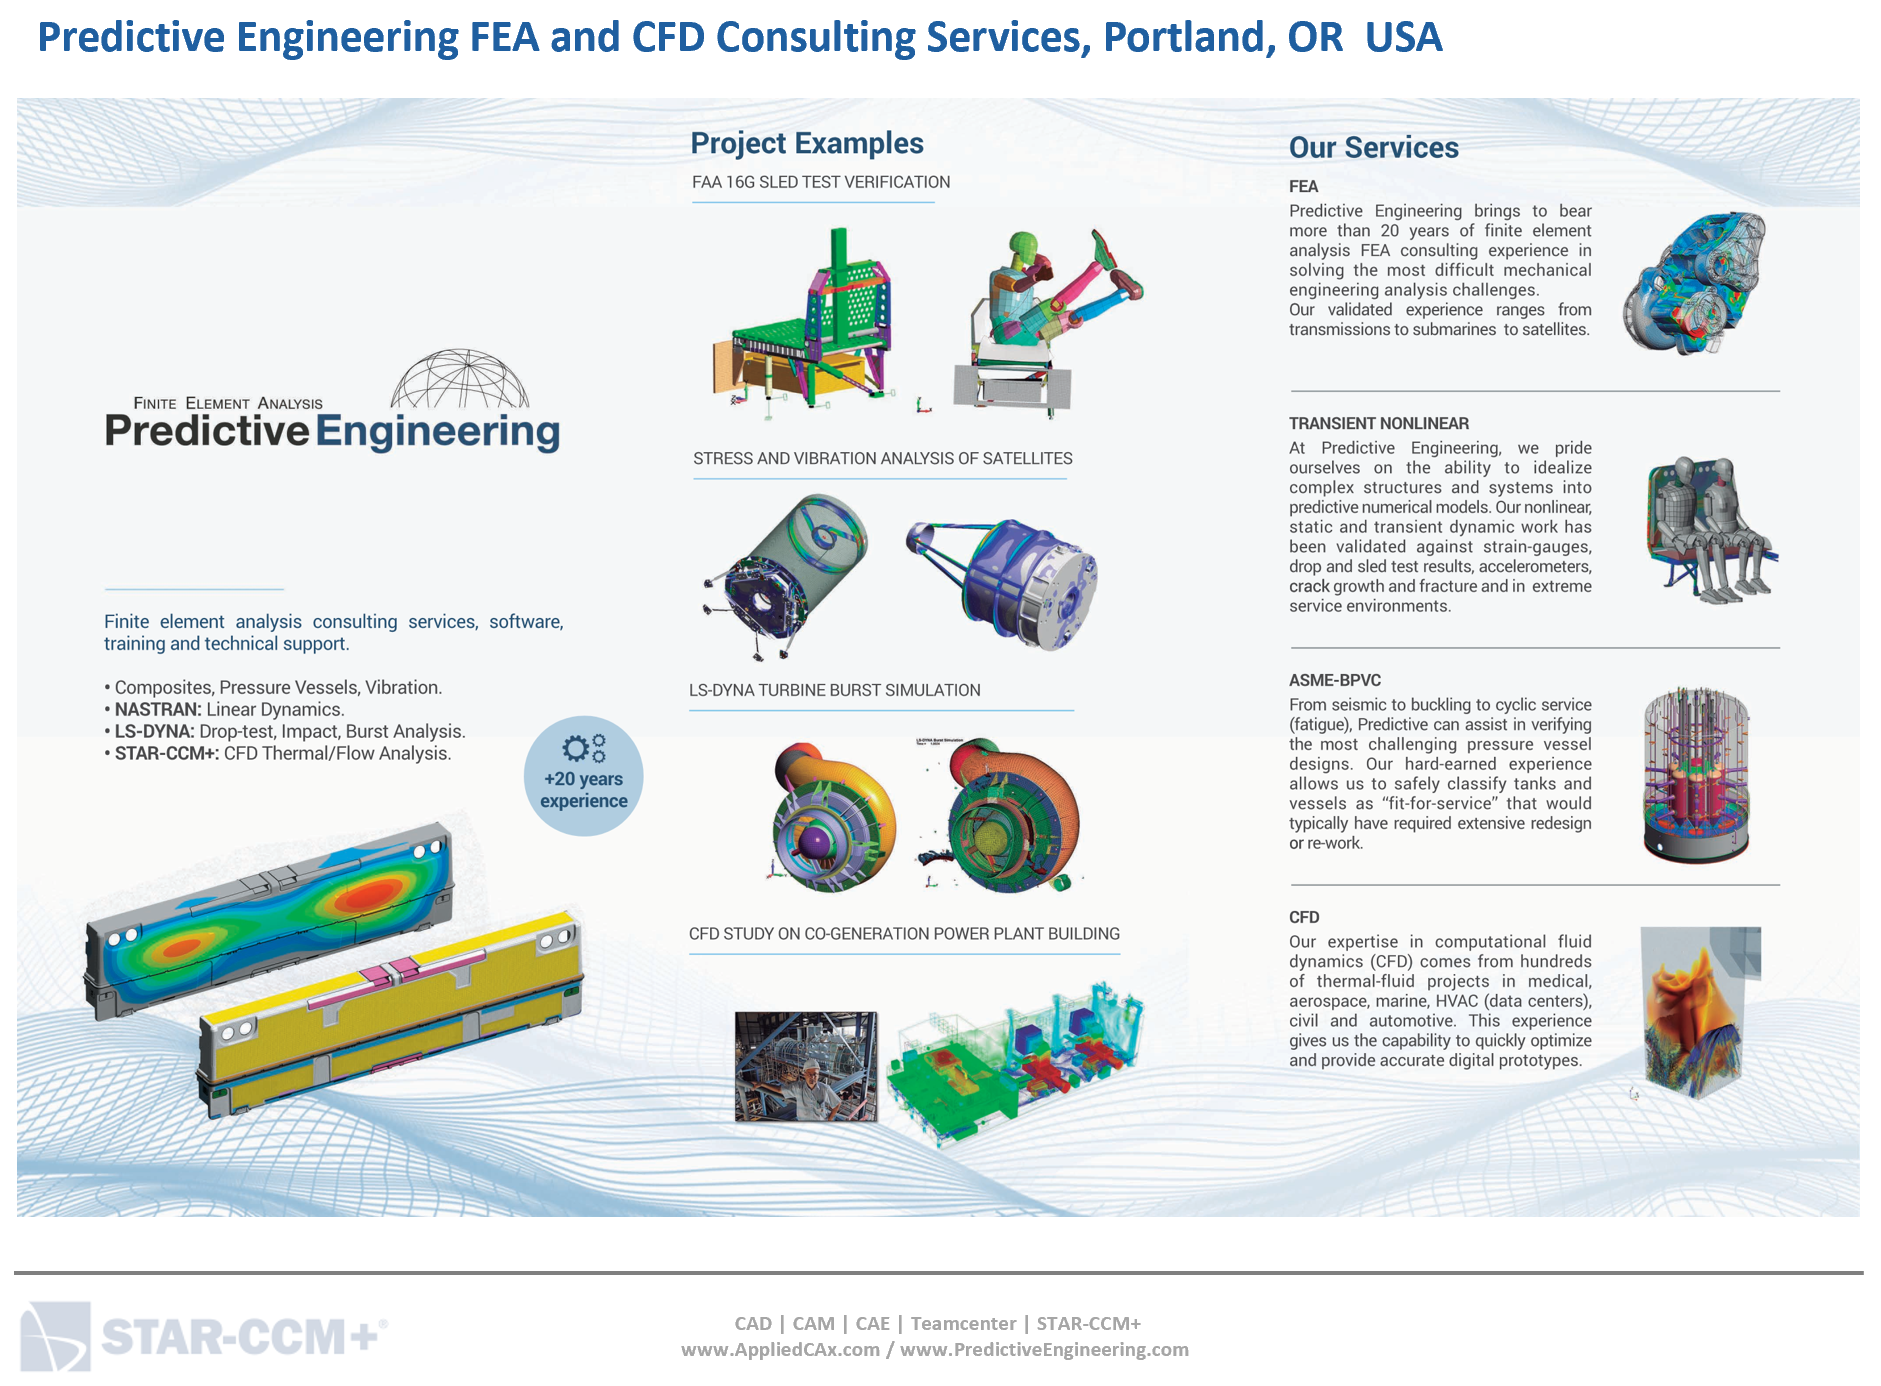 Predictive Engineering FEA and CFD Consulting Services Portland OR USA